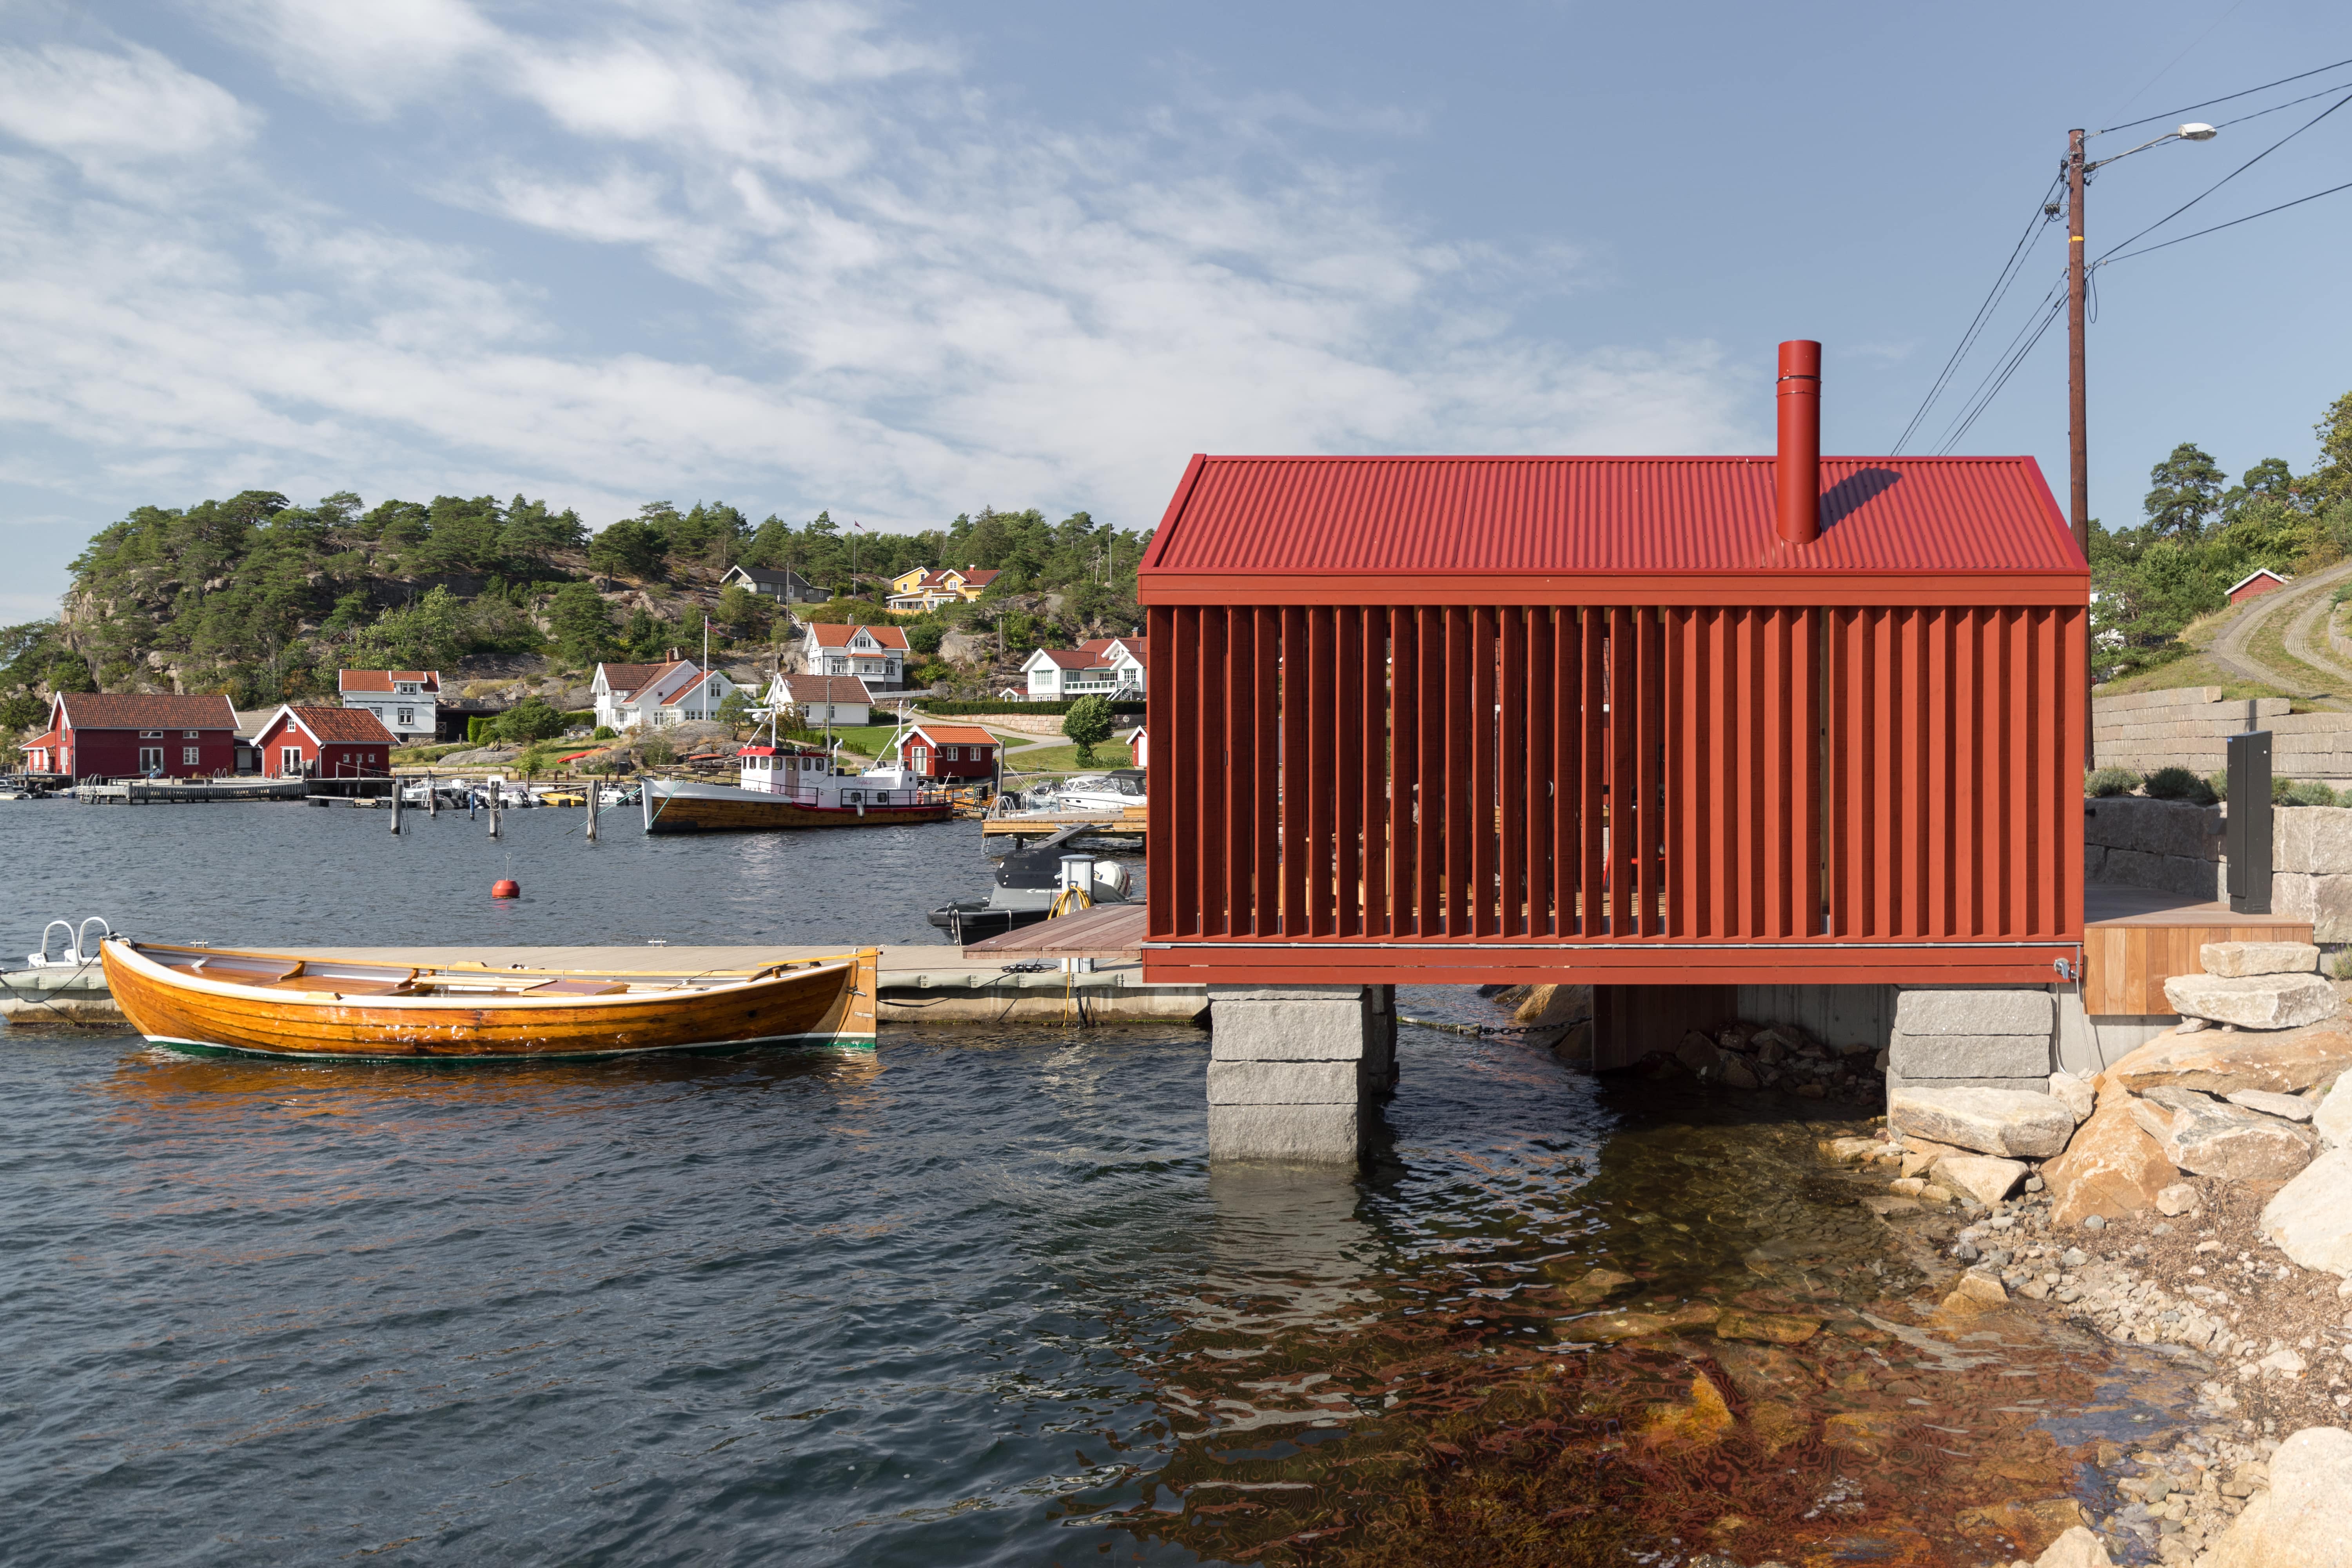 Badehus stands on a galvanized steel frame structure with red-painted cladding and tin roof